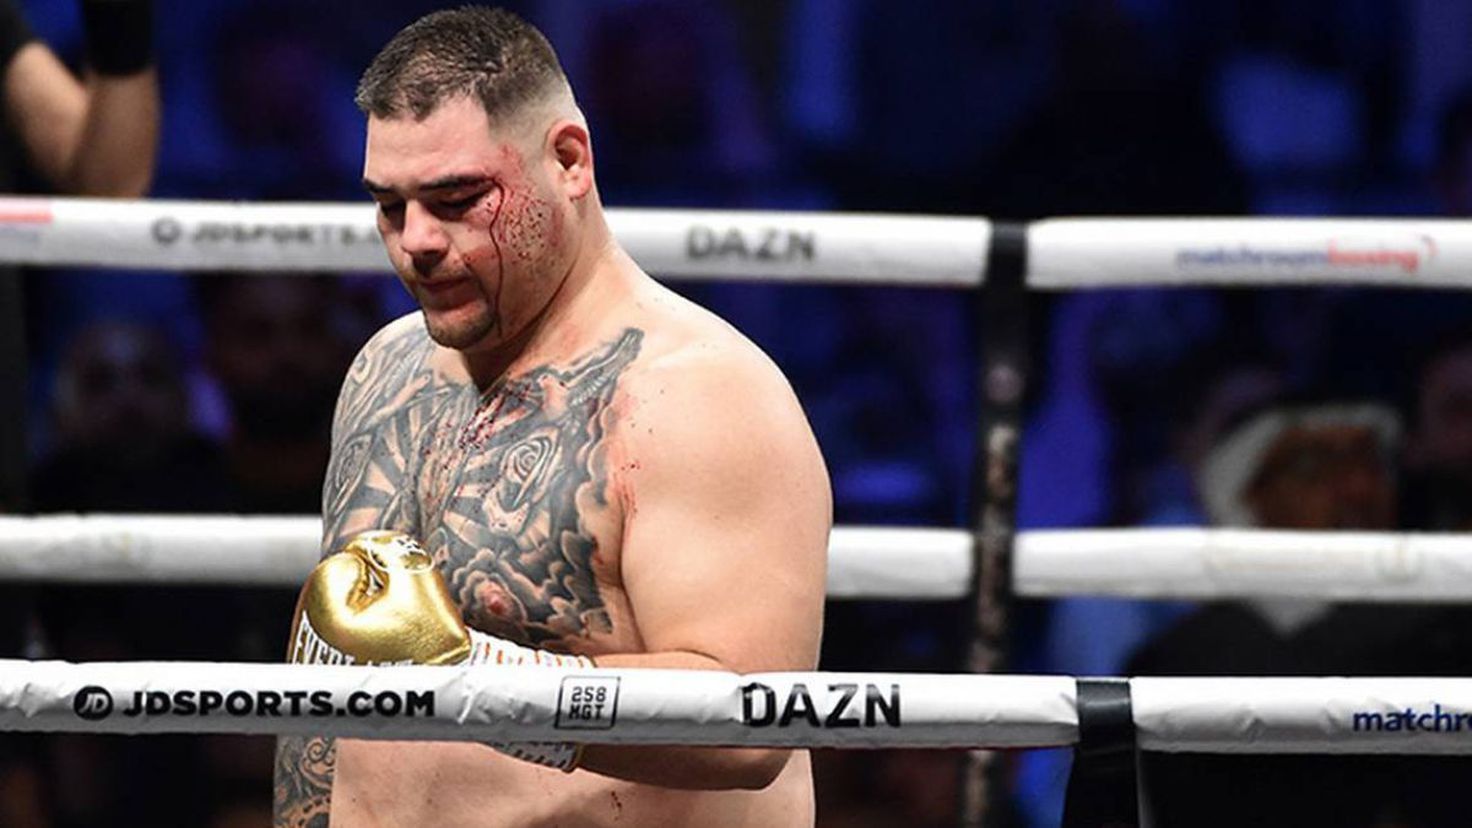 Andy Ruiz vs Tyson Fury would not take place
